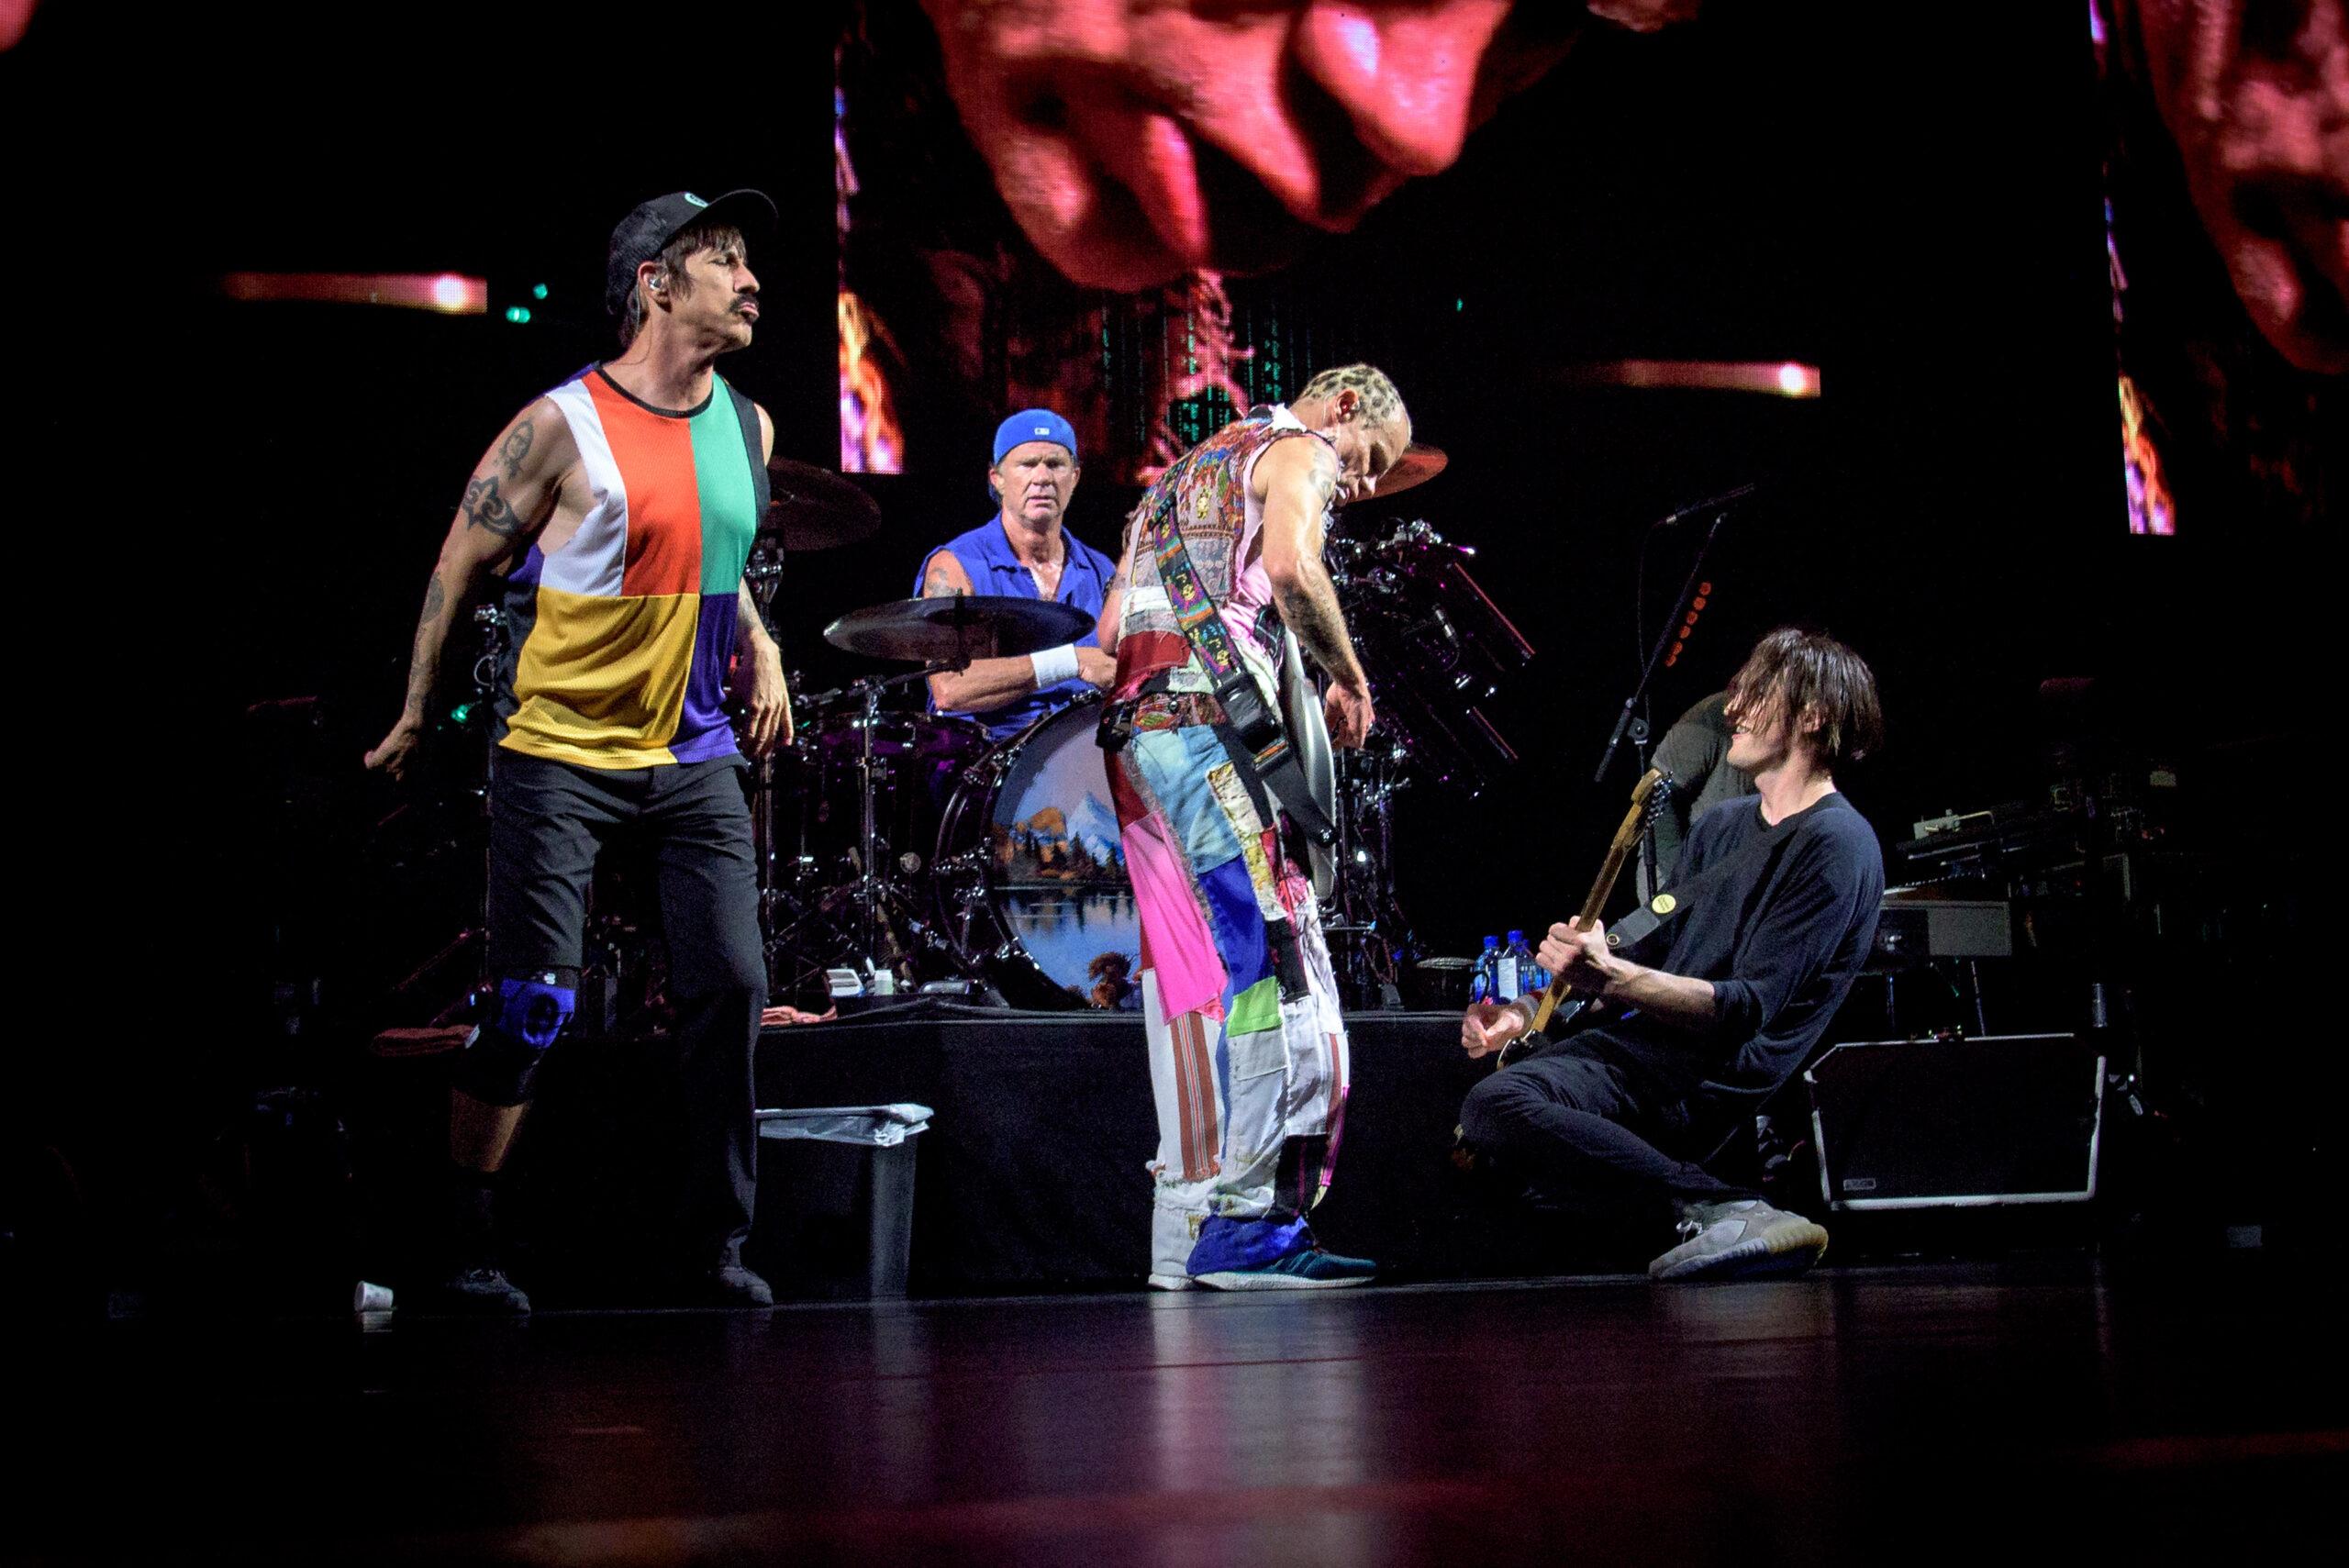 American funk rock band 'Red Hot Chili Peppers' performed sold out show at FirstOntario Centre in Hamilton, Ontario. 